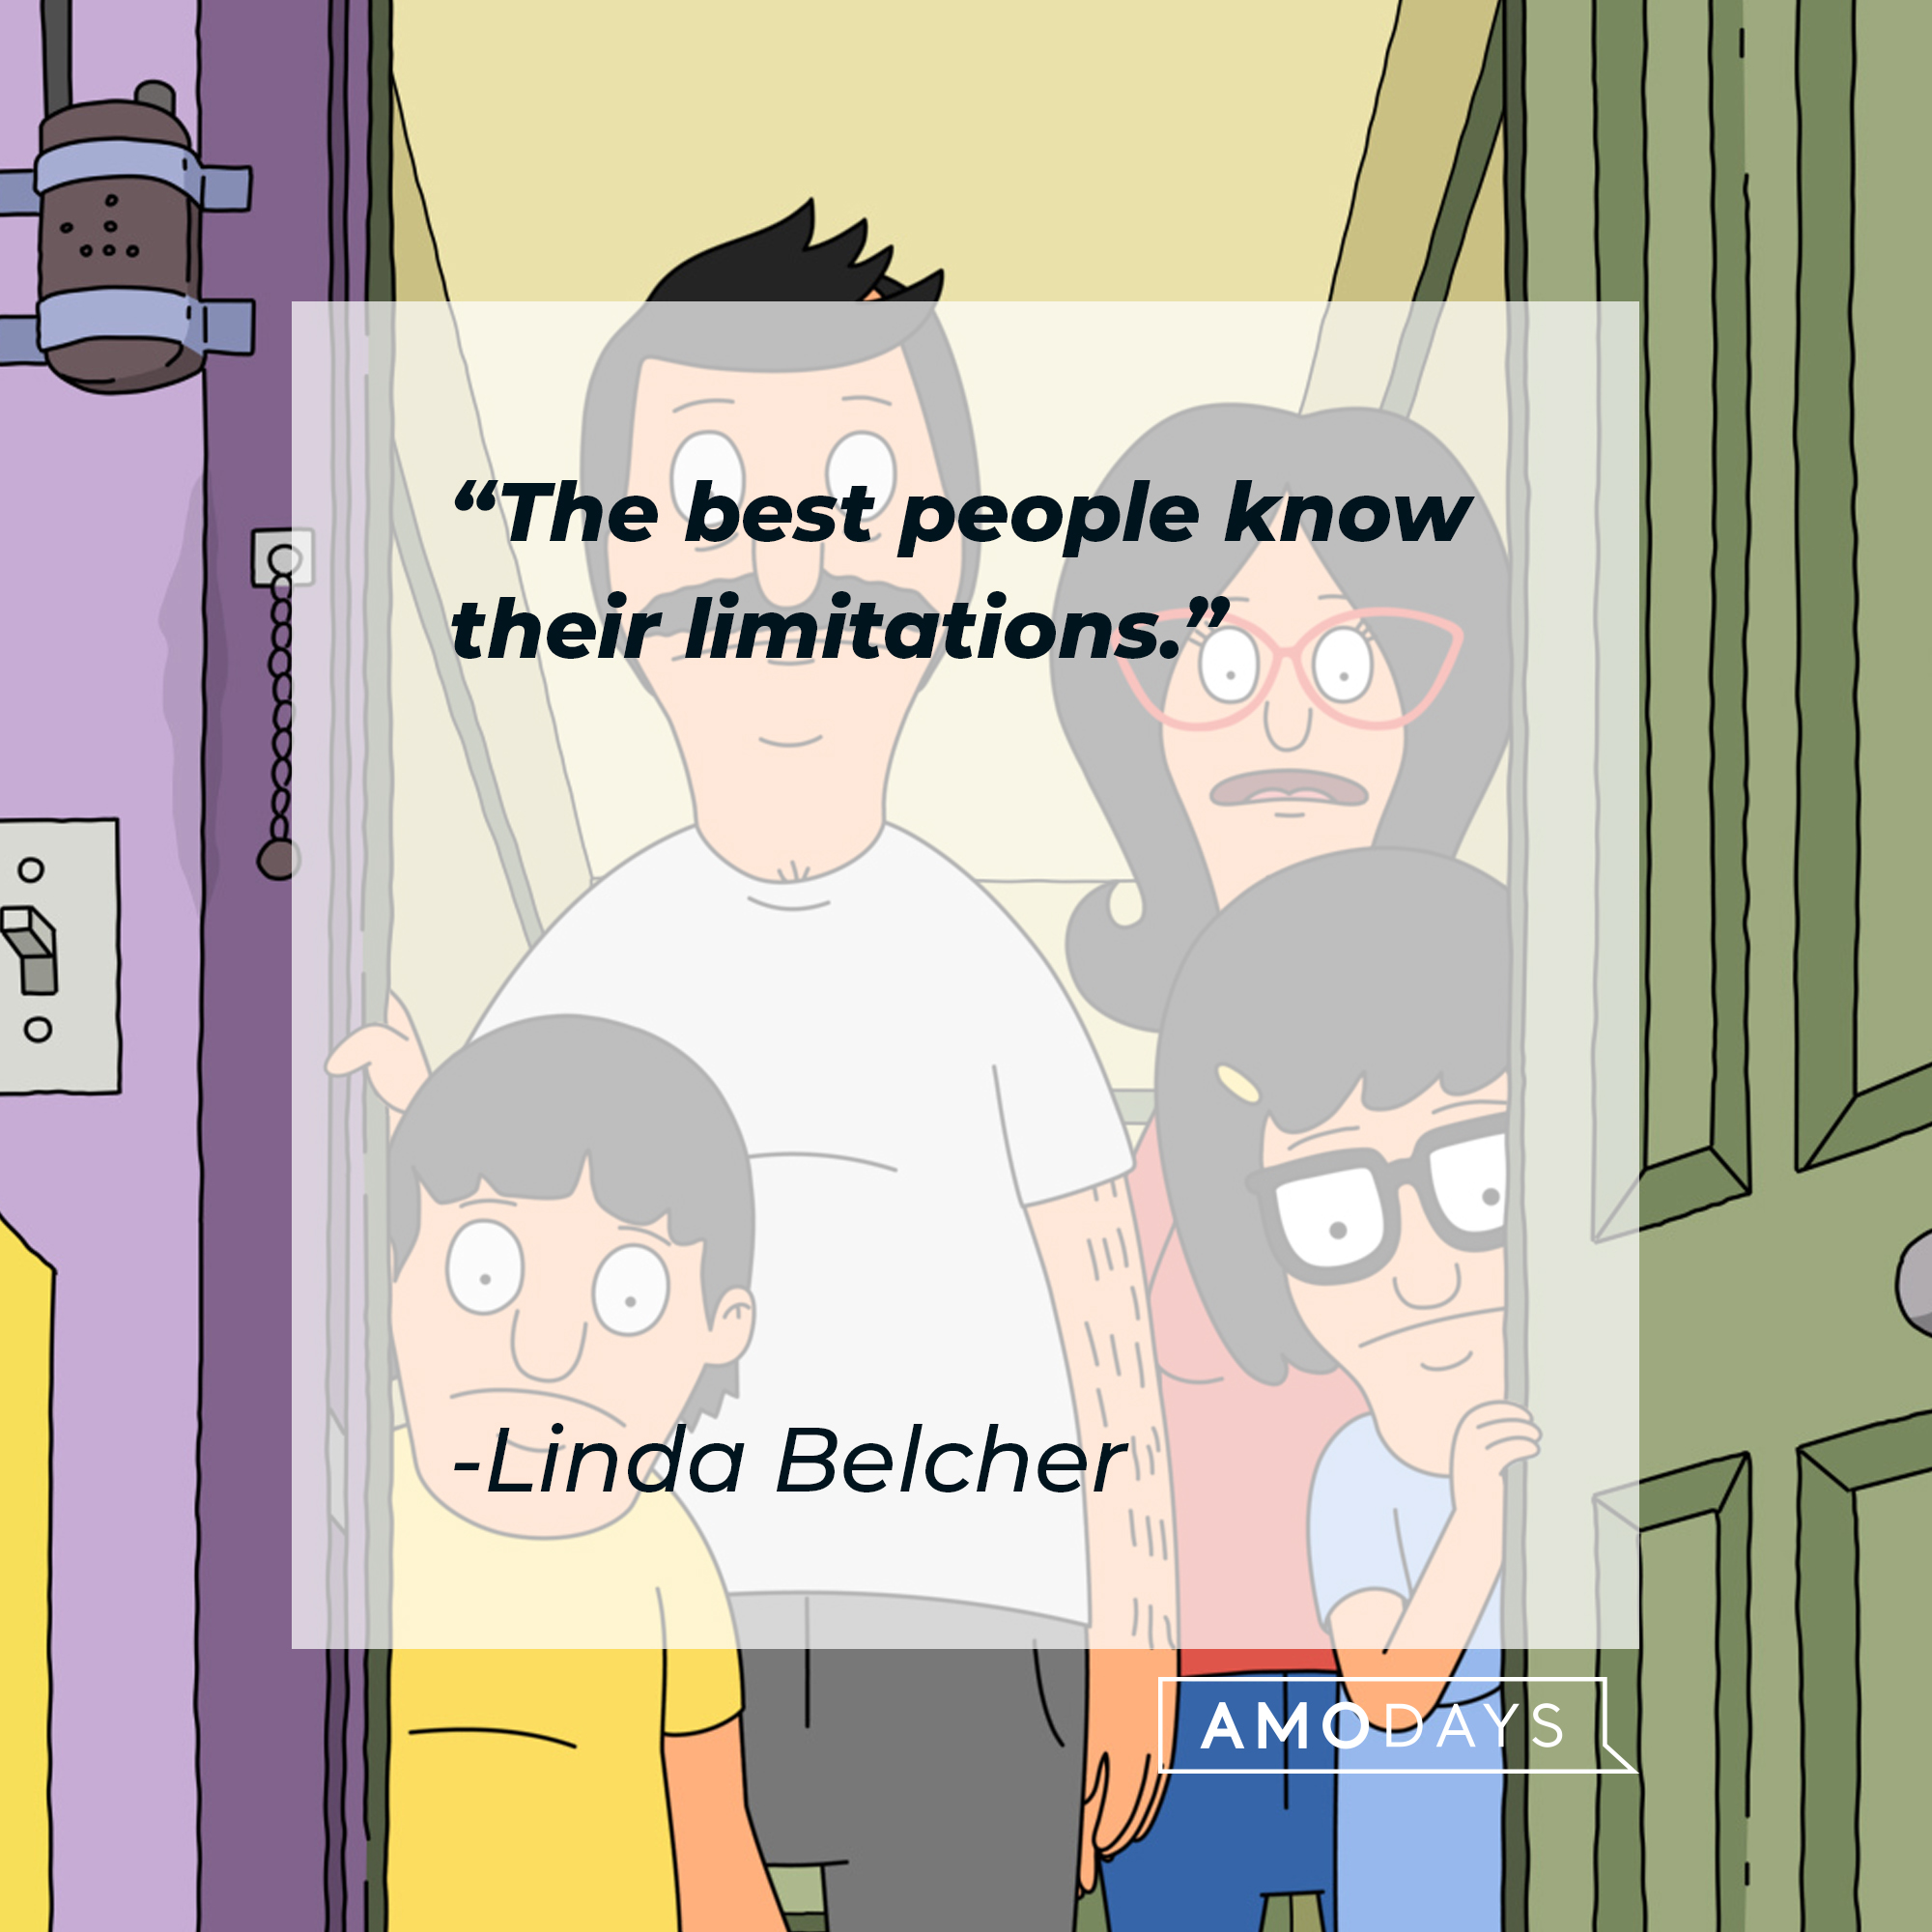 Linda Belcher's quote: "The best people know their limitations." | Source: facebook.com/BobsBurgers